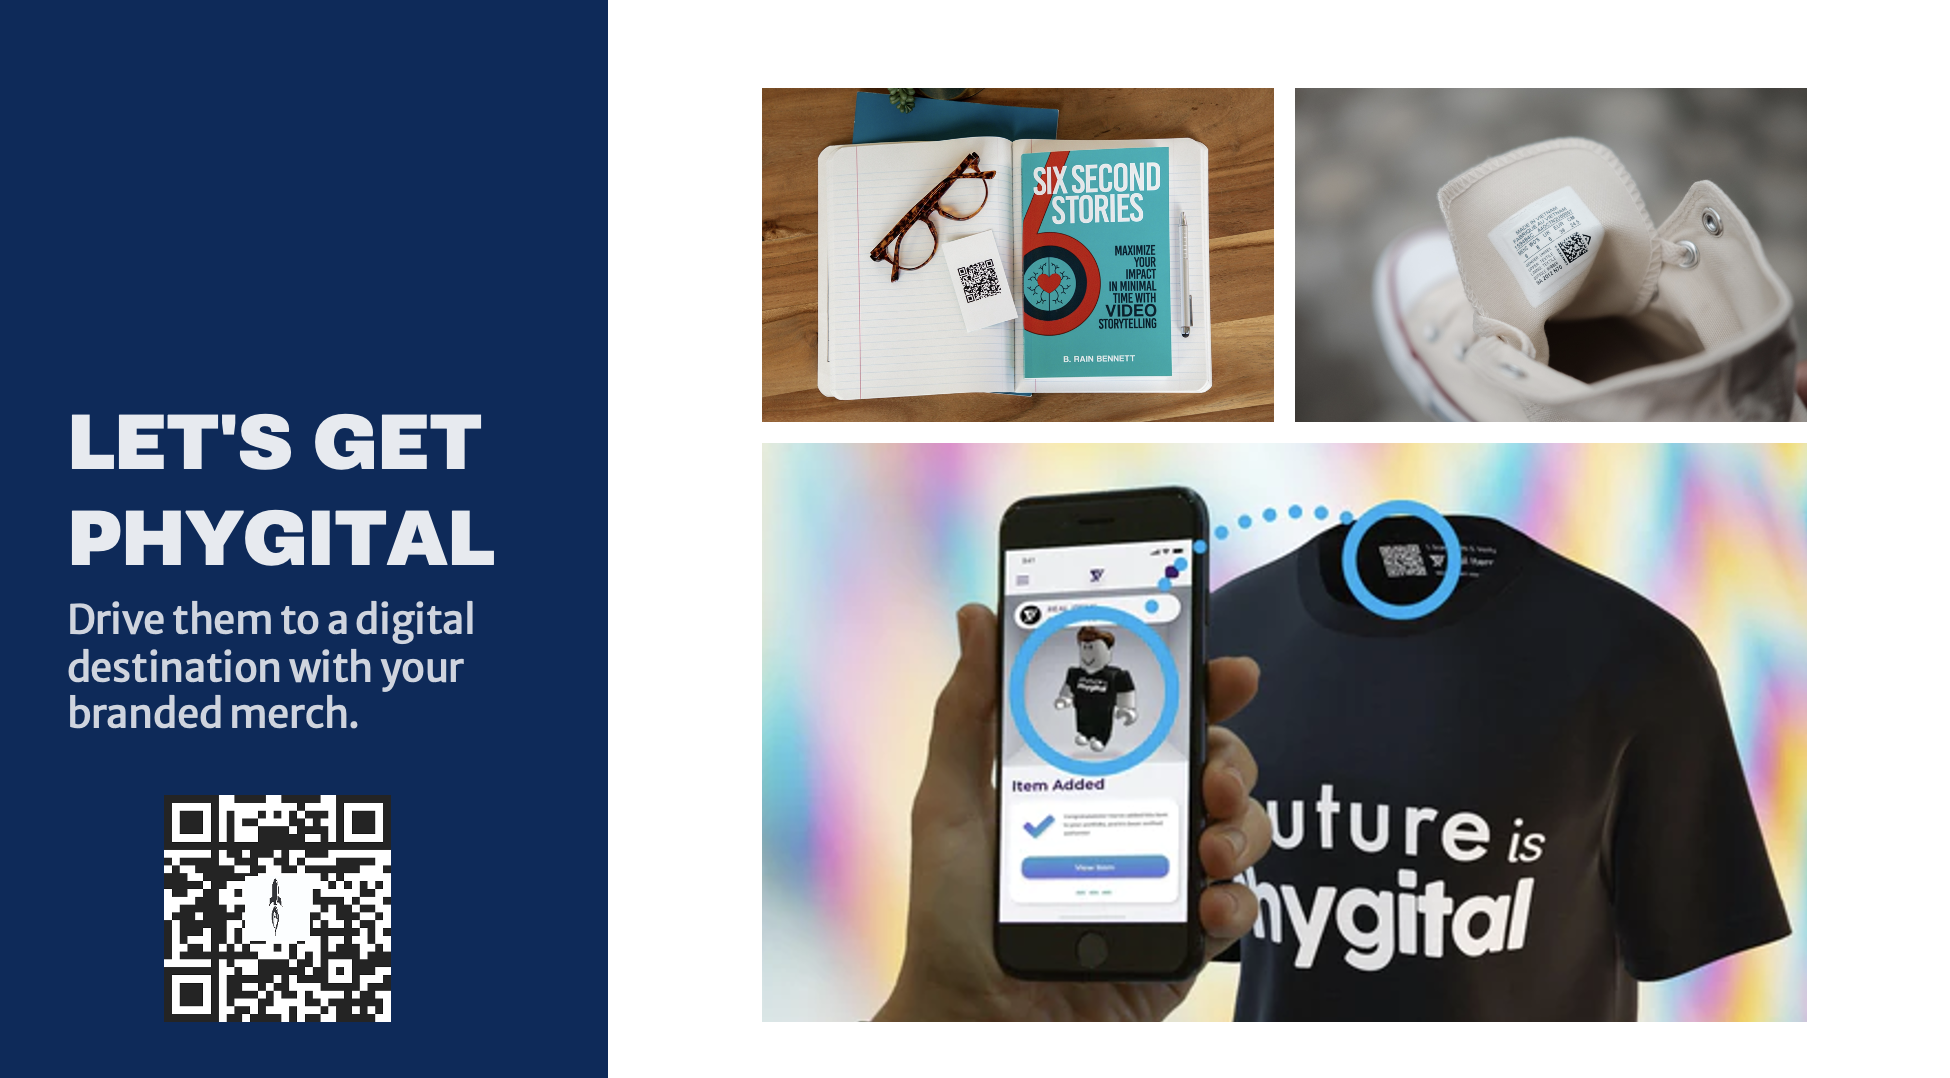 image of slide deck that says "Let's get phygital - drive them to a digital destination with your branded merch